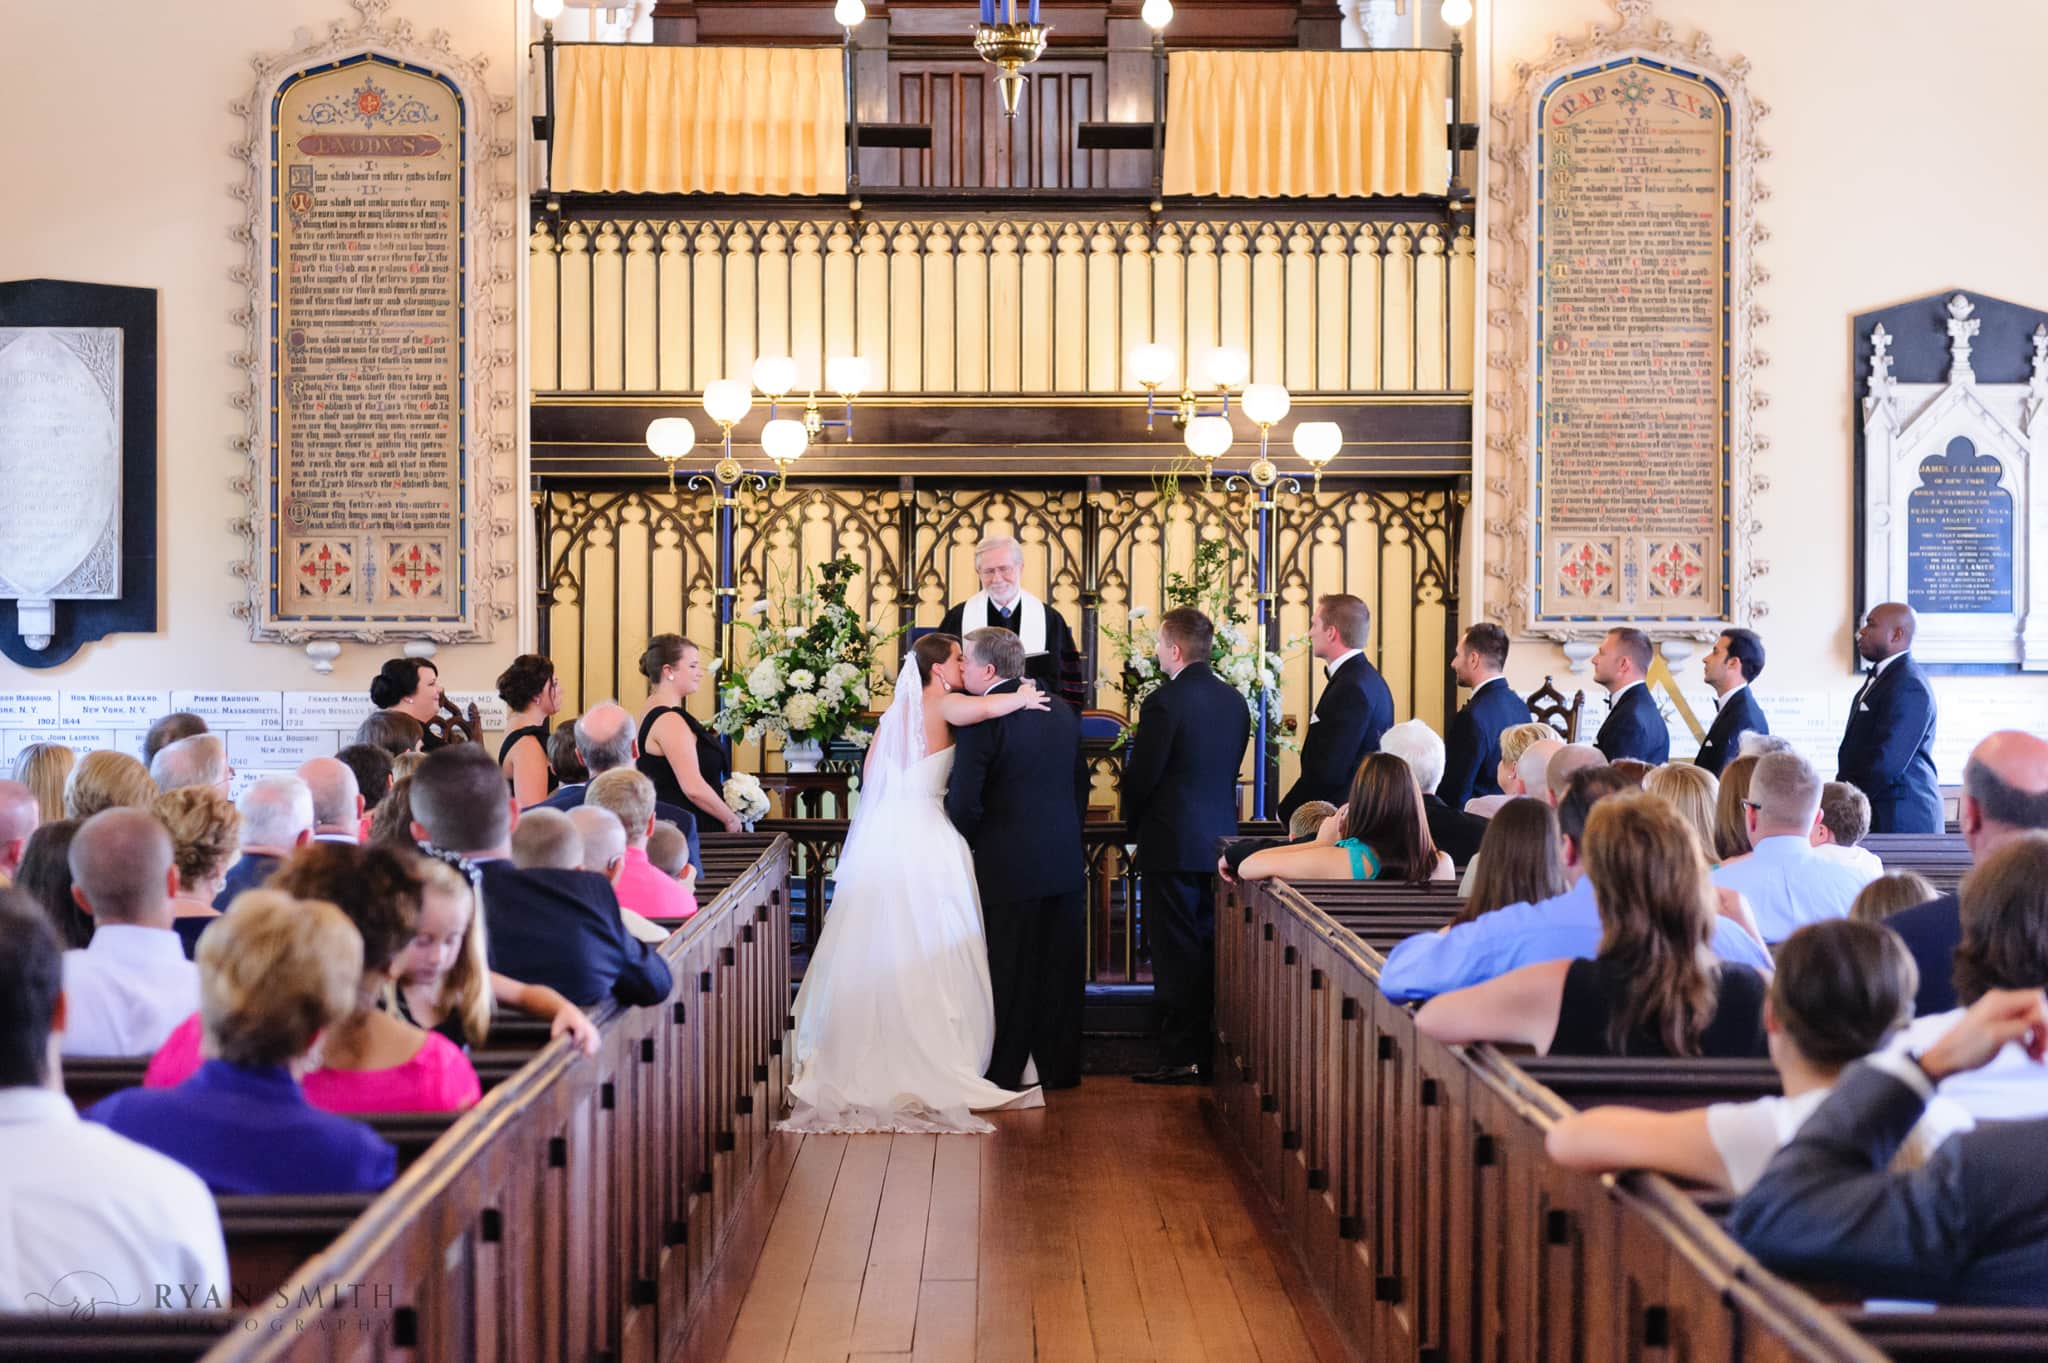 Father giving away the bride with a kiss - French Huguenot Protestant Church